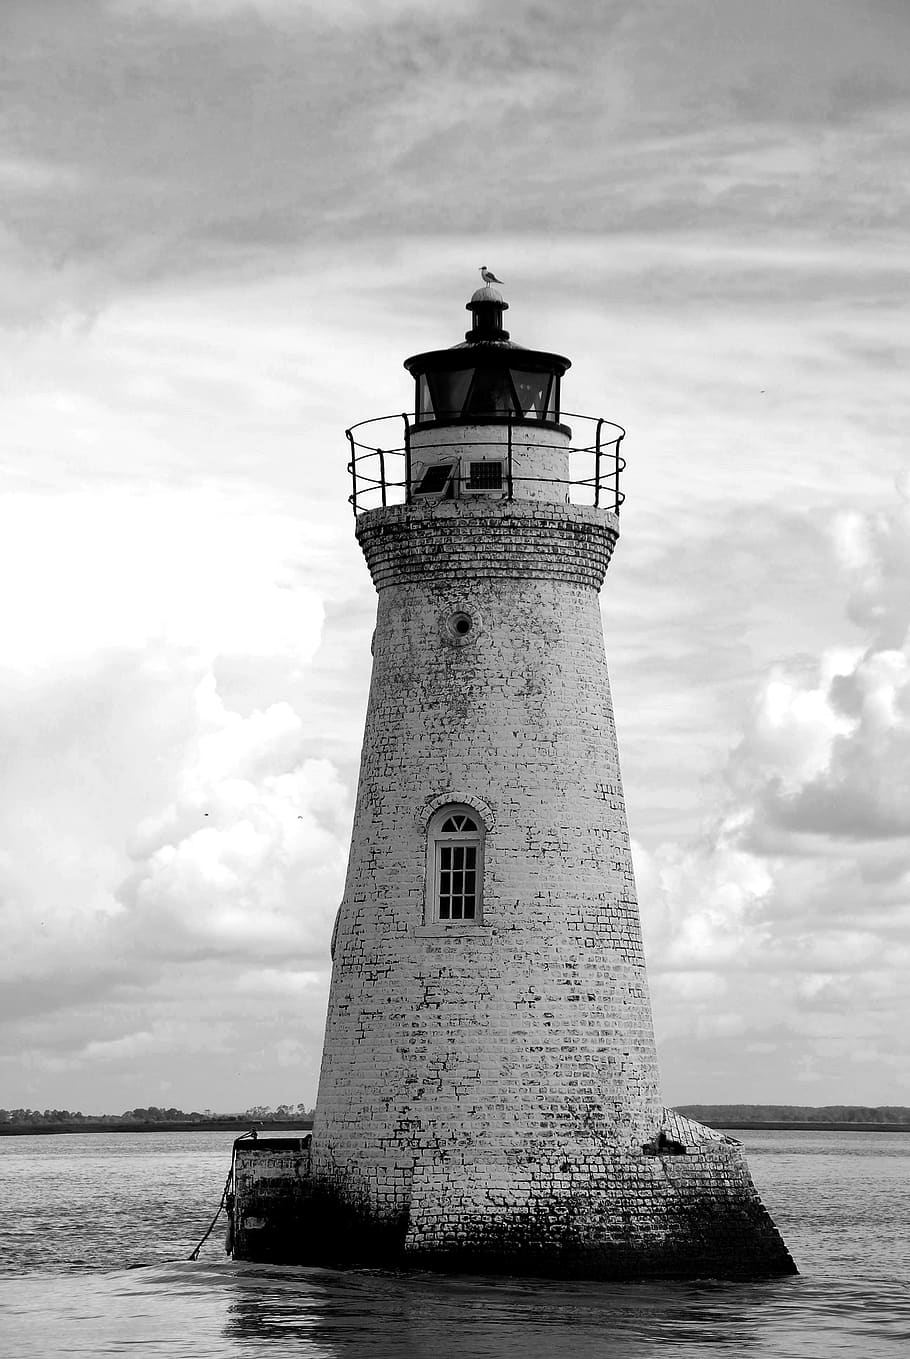 cockspur lighthouse, beacon, warning, nautical, ocean, river, ships, boats, black and white, monochrome